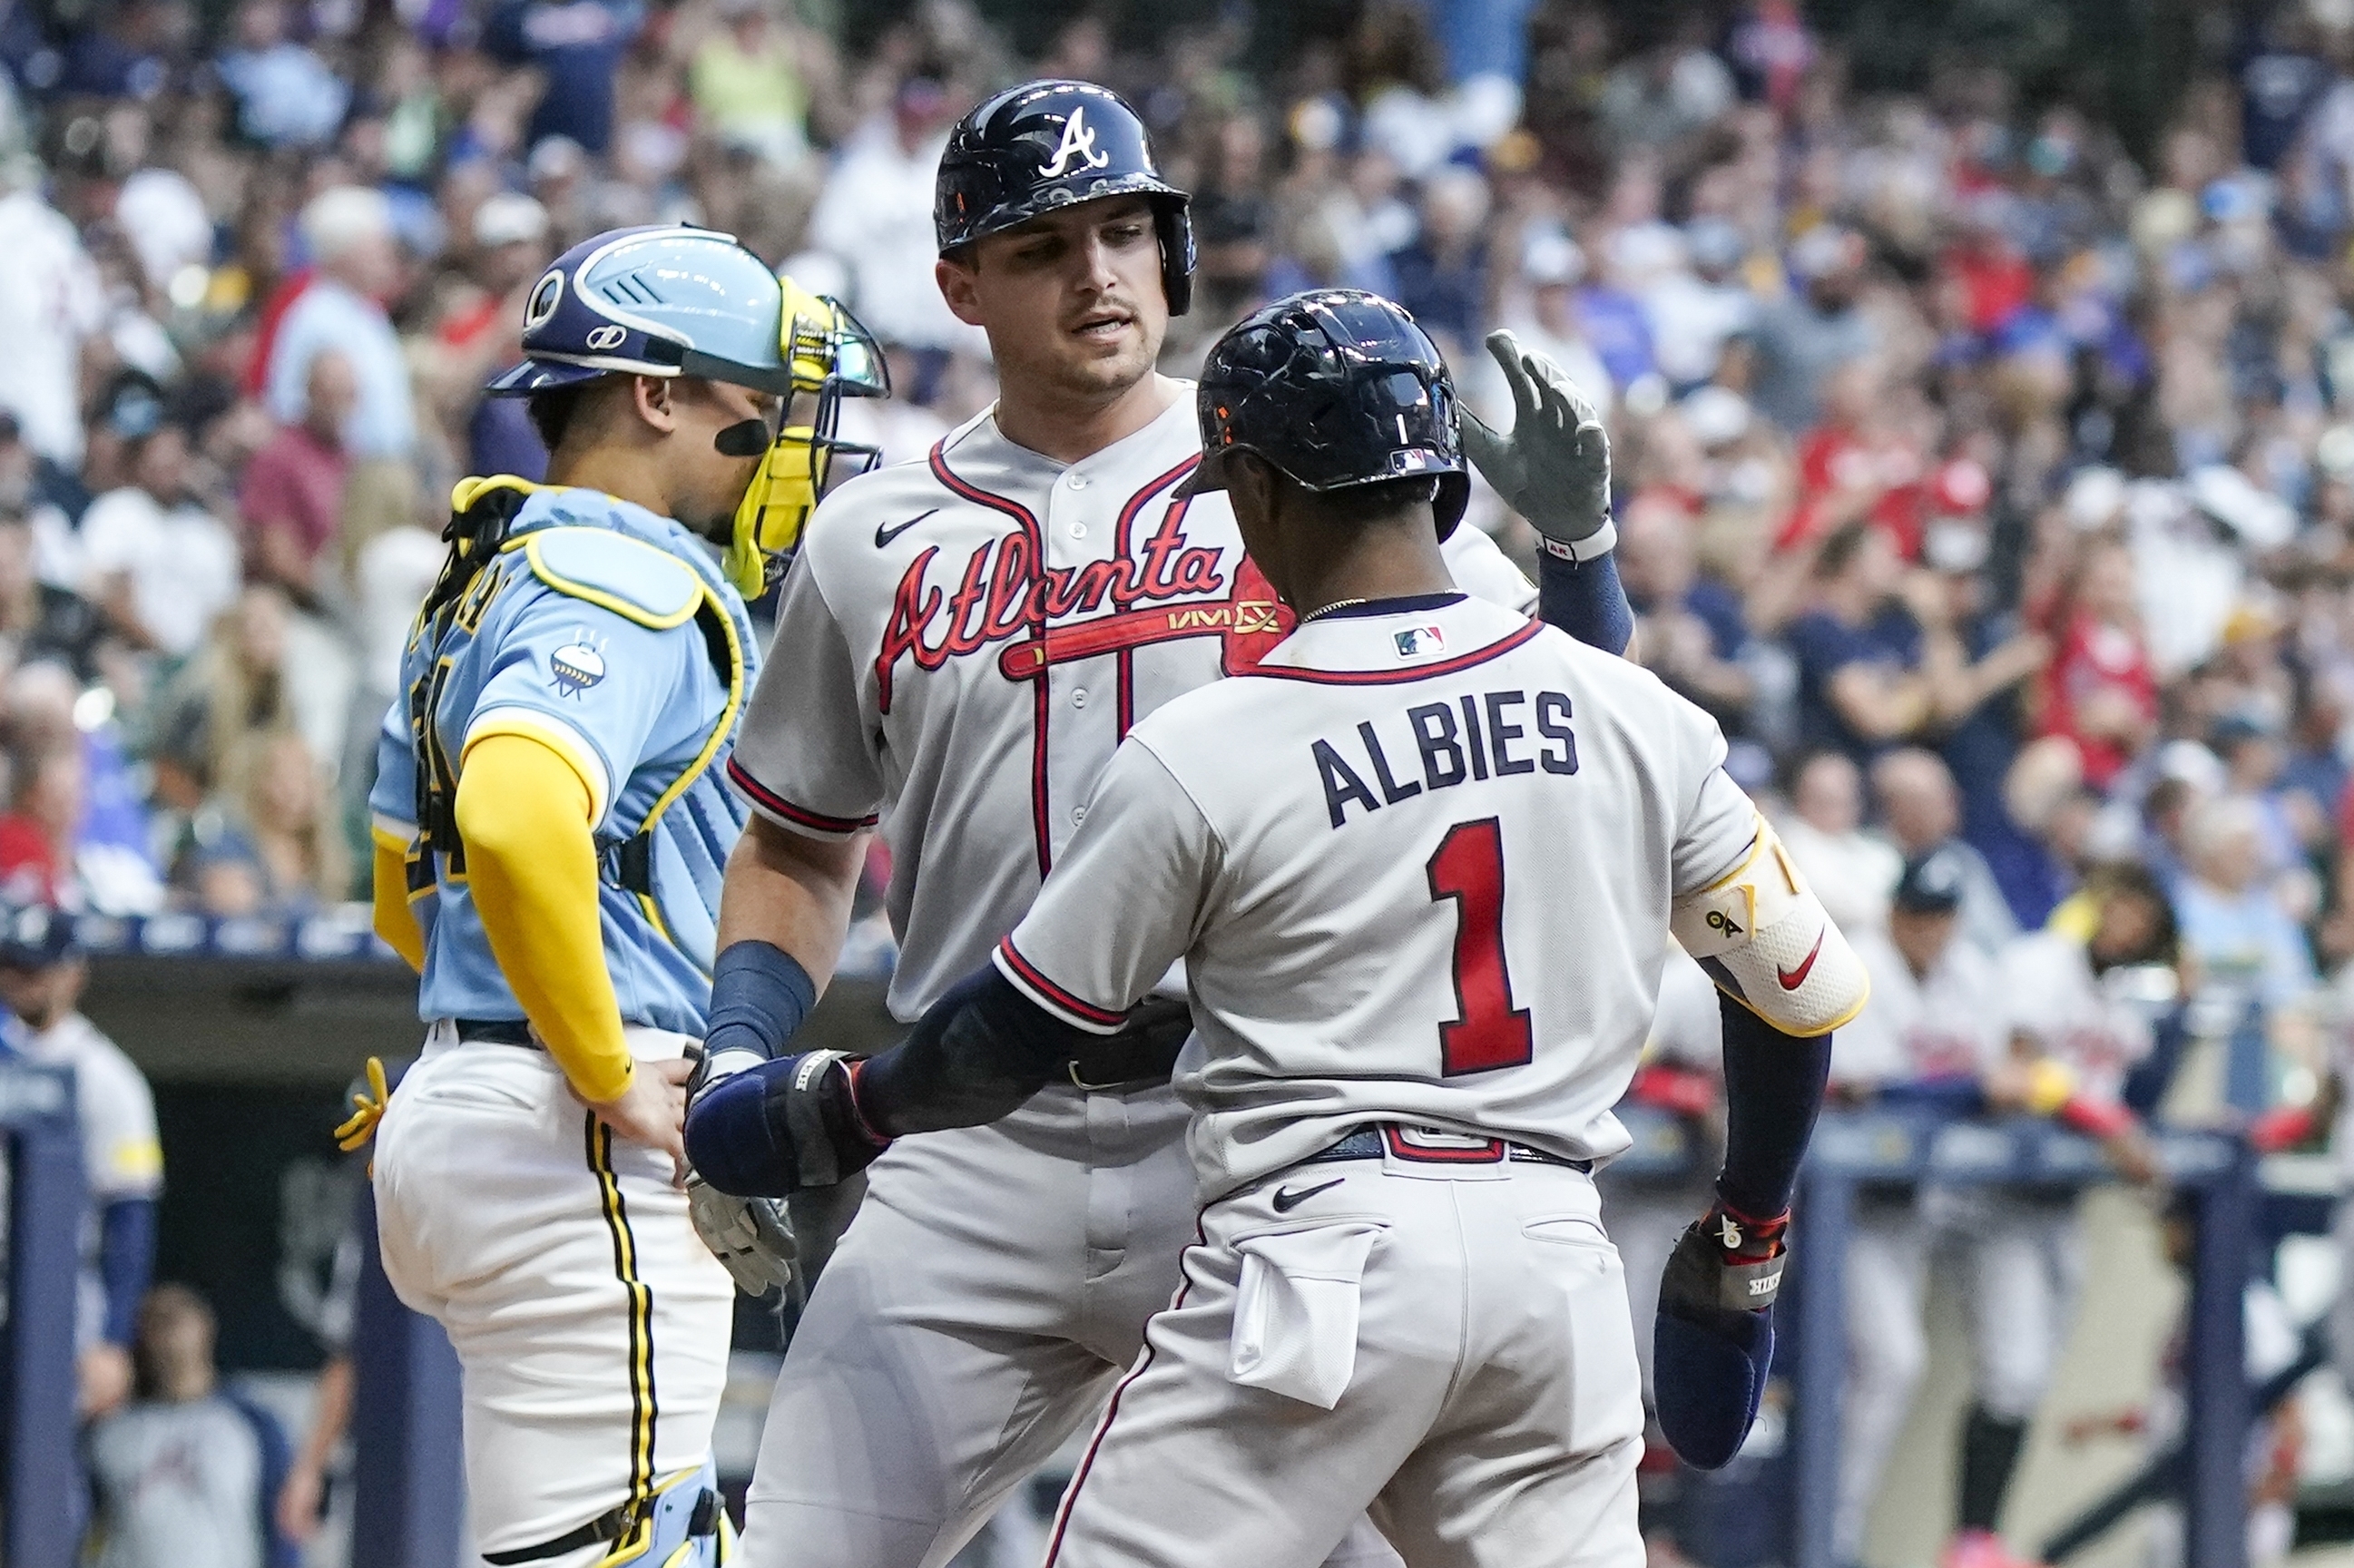 Braves' Ozzie Albies to go on injured list due to hamstring injury